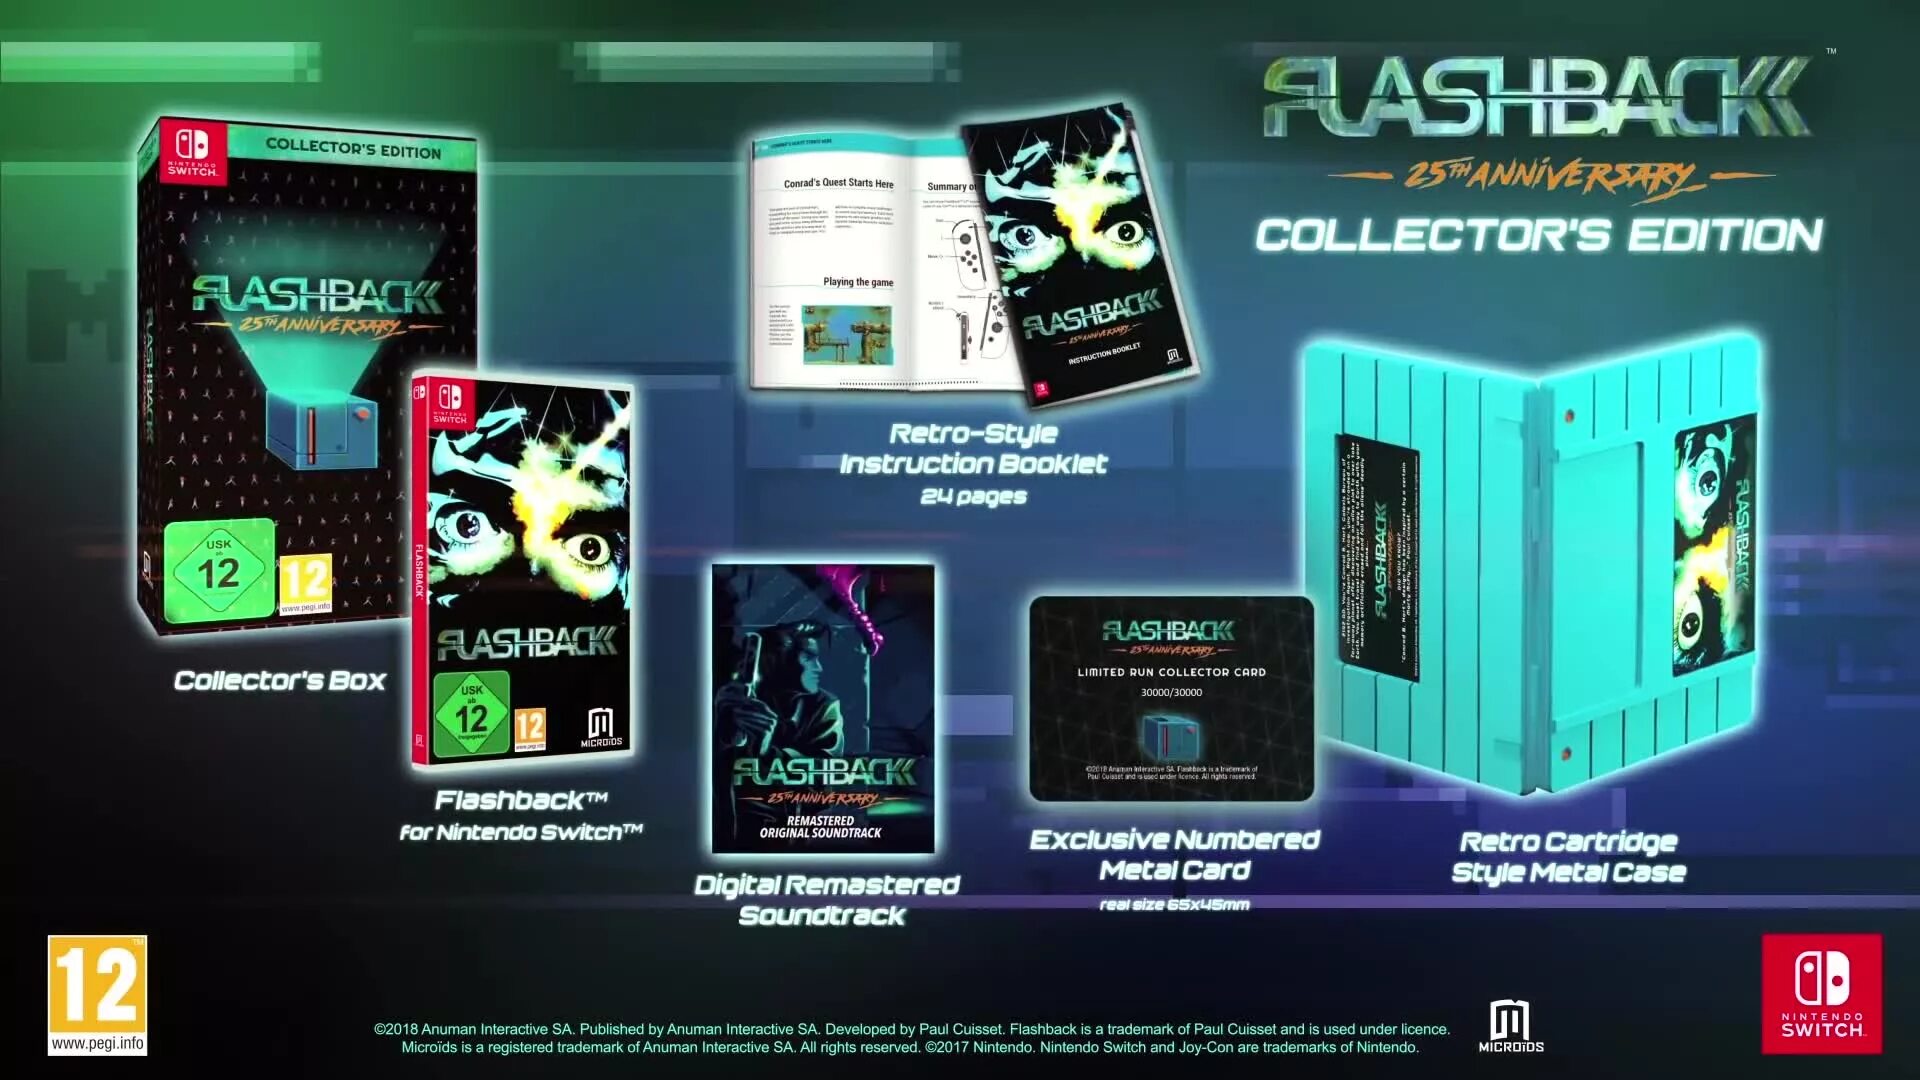 Игра Flashback Nintendo Switch. Flashback 25th Anniversary Collectors Edition. Flashback Collector's Edition. Игра Flashback Limited Edition. Classic games collection